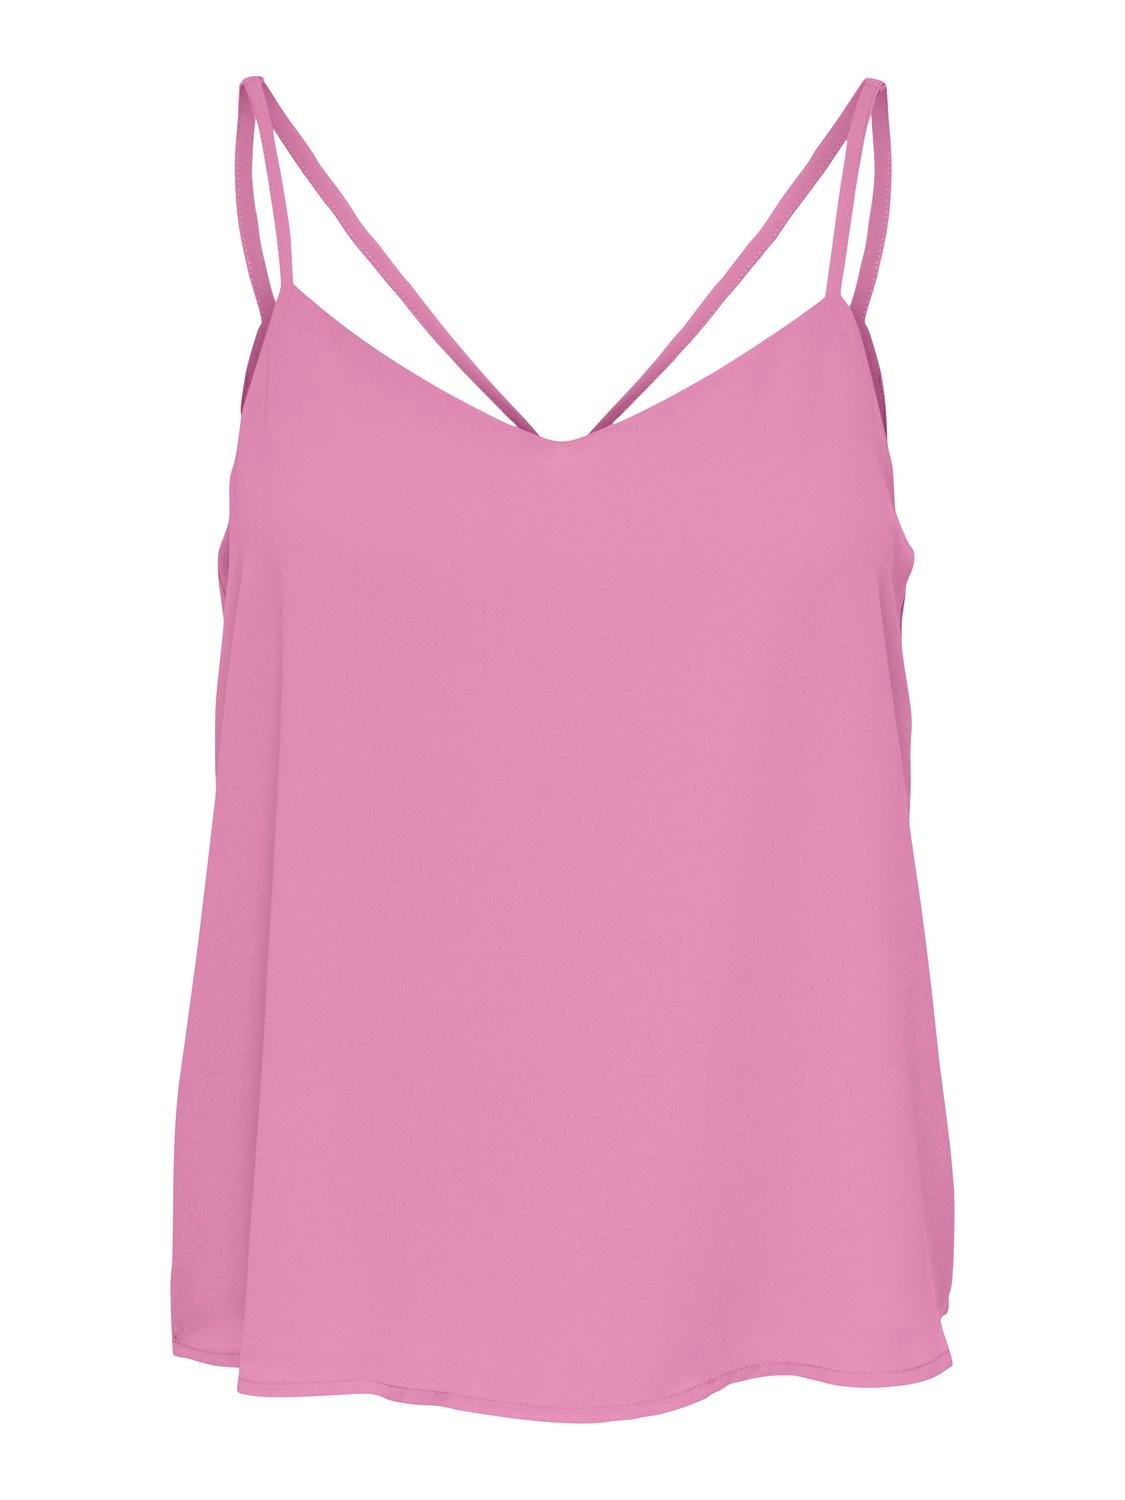 ONLY Loose Singlet Top -Fuchsia Pink - 15177444